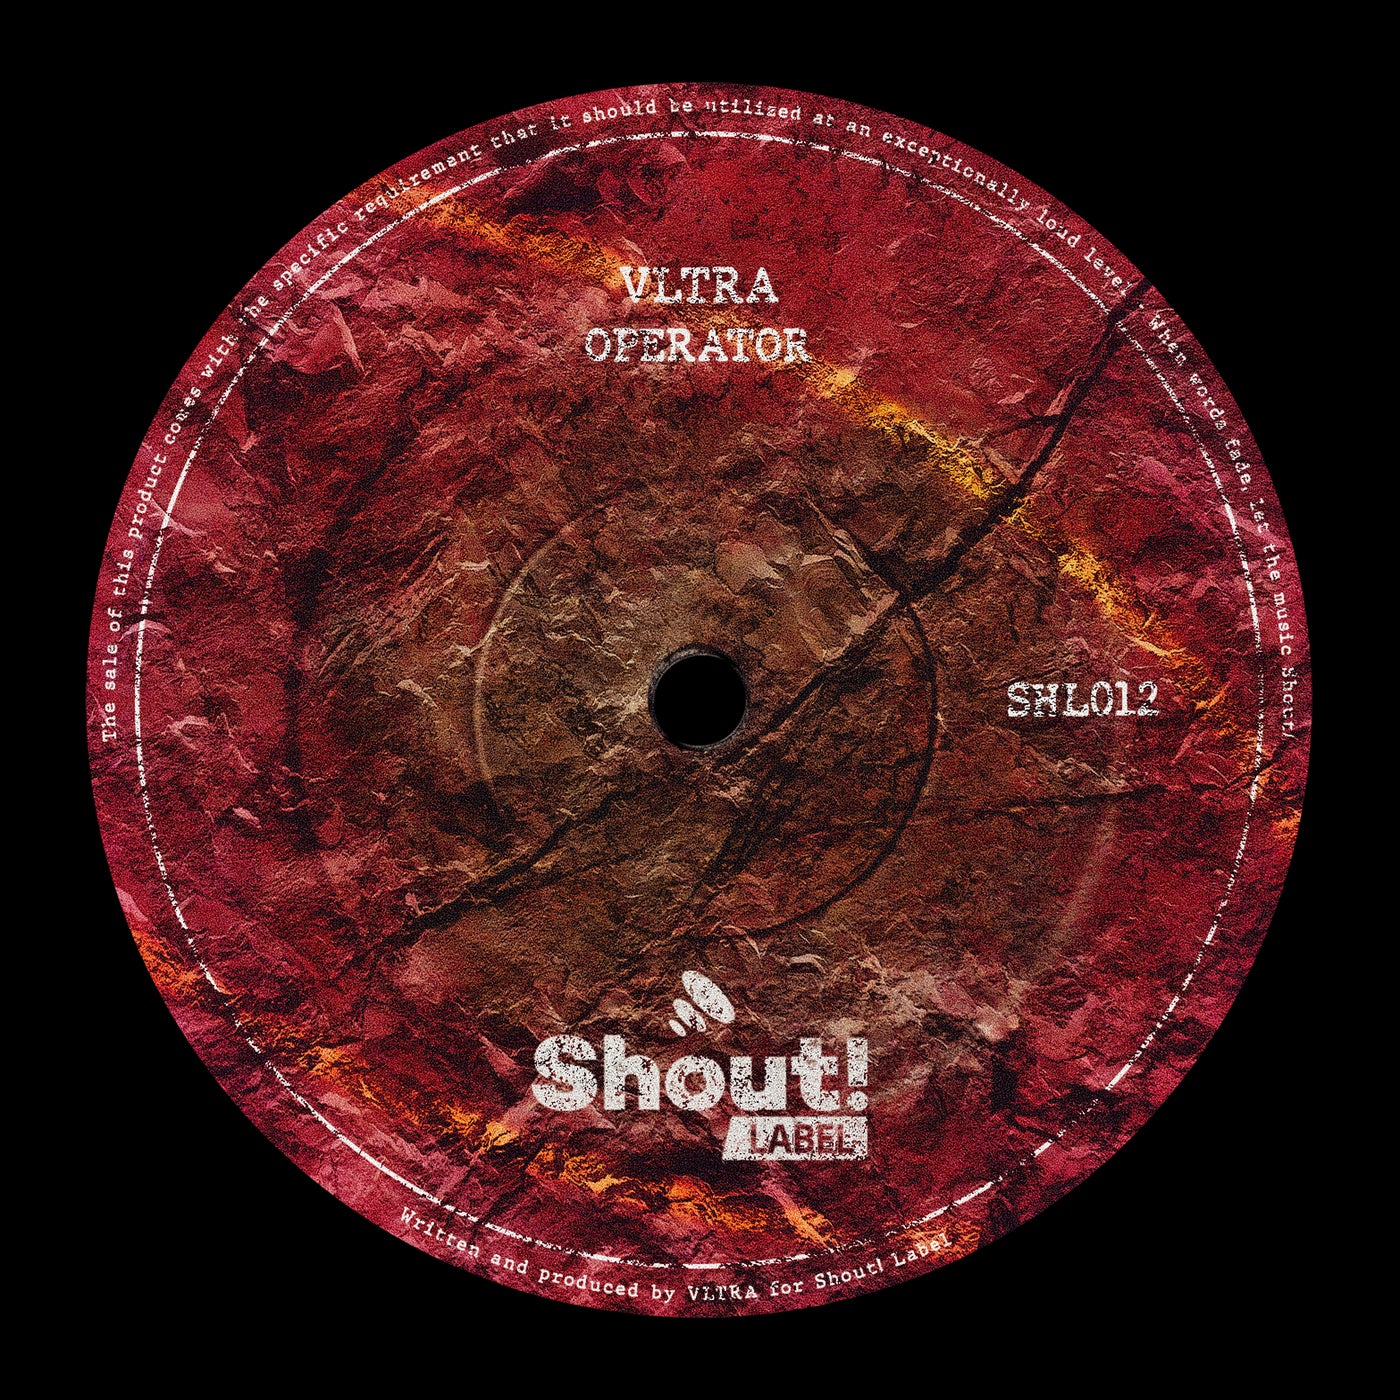 image cover: VLTRA (IT) - Operator on Shout Label